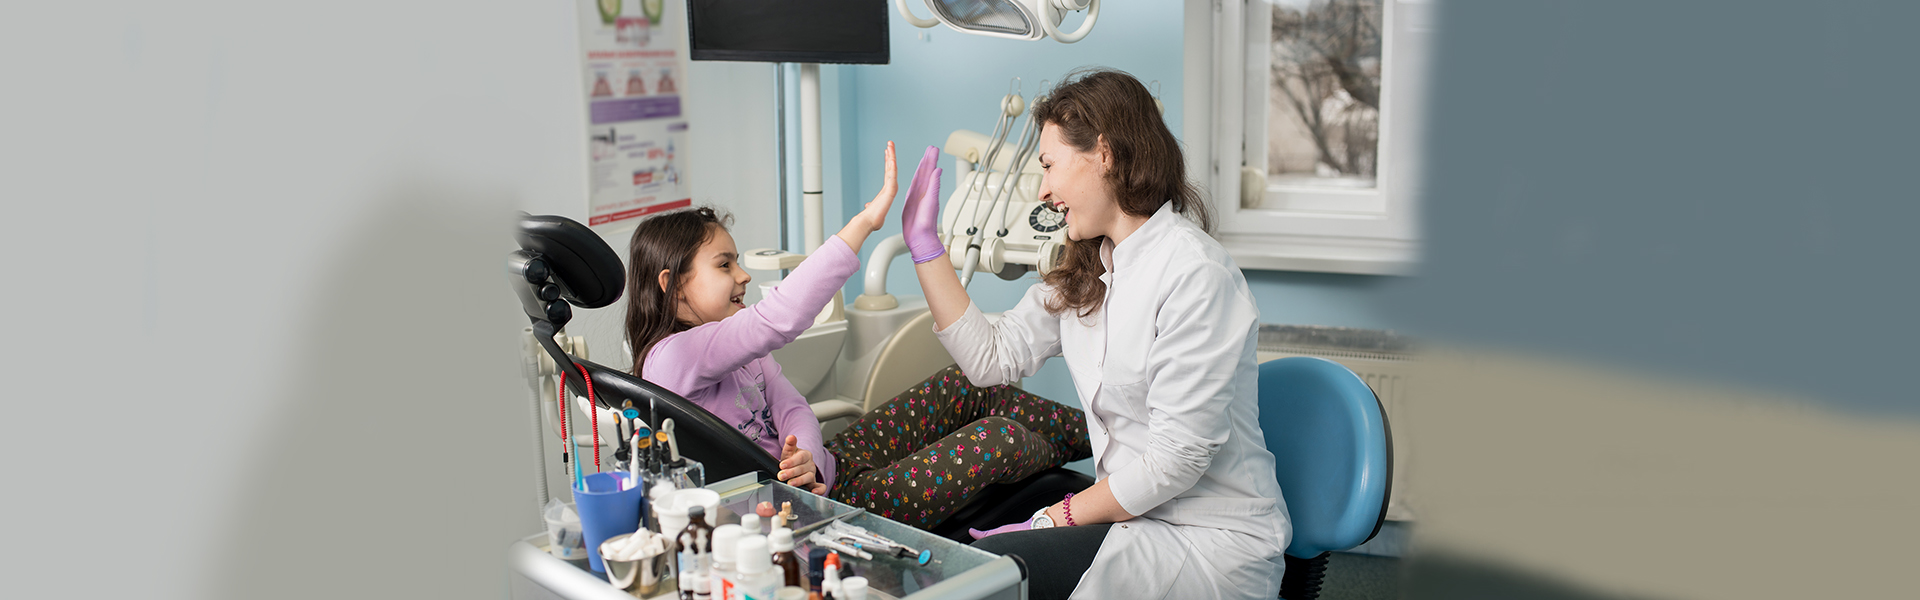 Benefits of Sedation Dentistry for Children with Anxiety